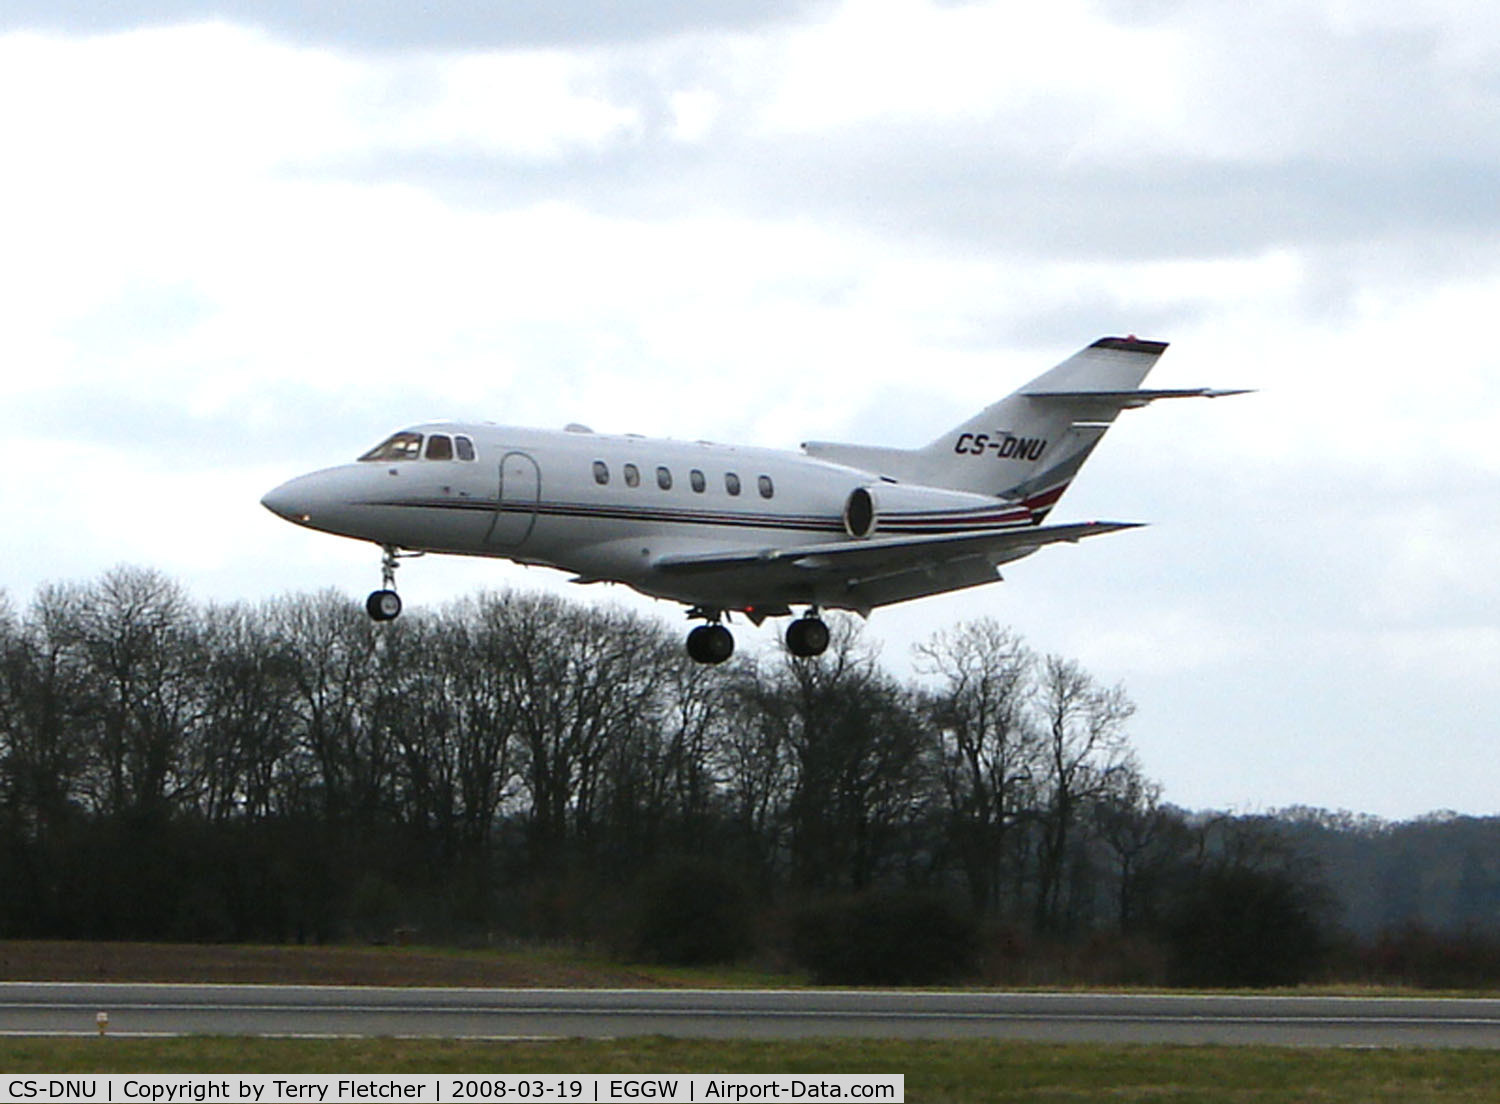 CS-DNU, 2000 Raytheon Hawker 800XP C/N 258479, Netjets Hawker 800XP about to land at Luton in dull weather